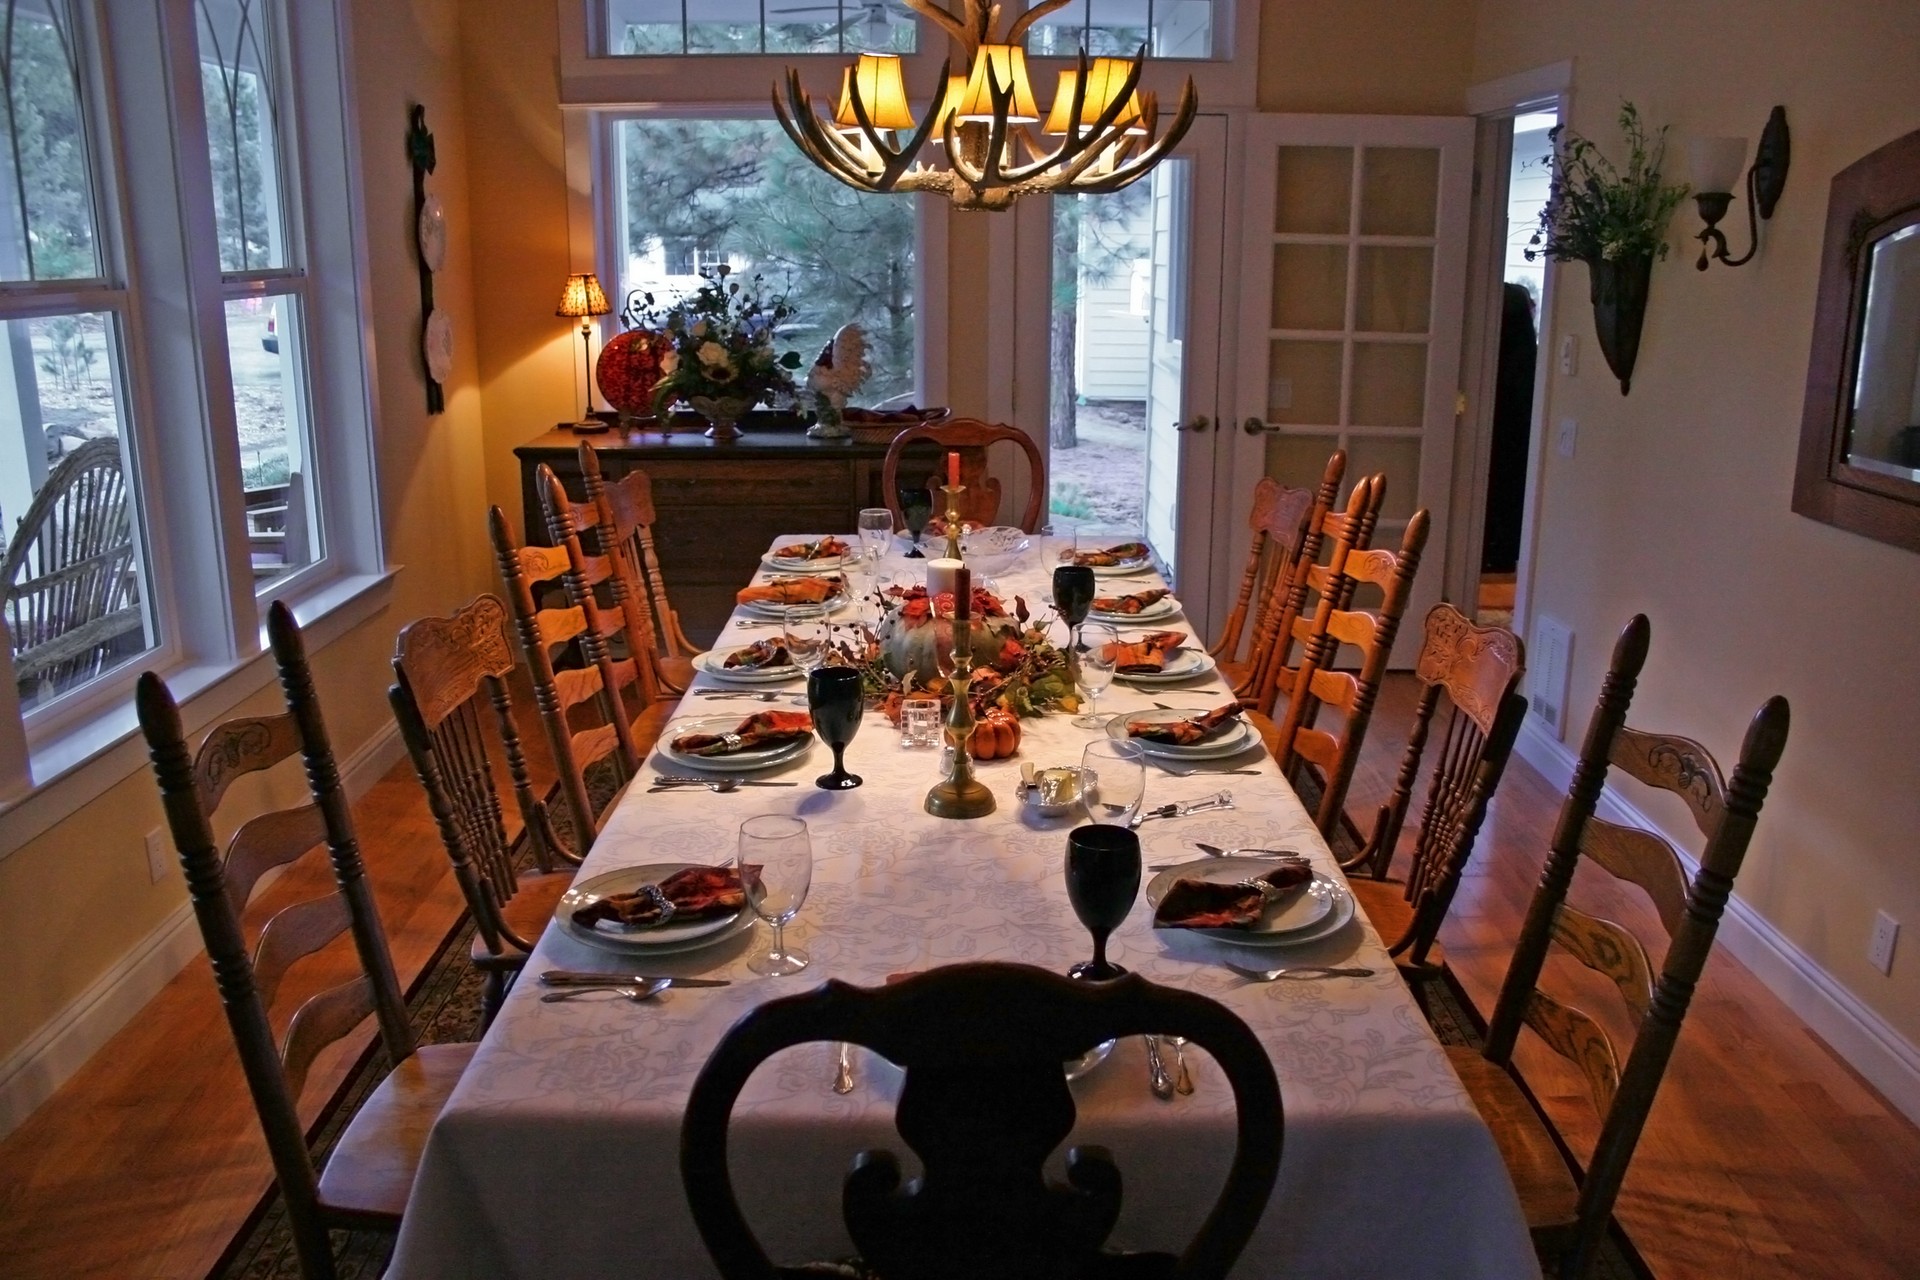 4 Festive Ways to Revamp Your Home for Thanksgiving